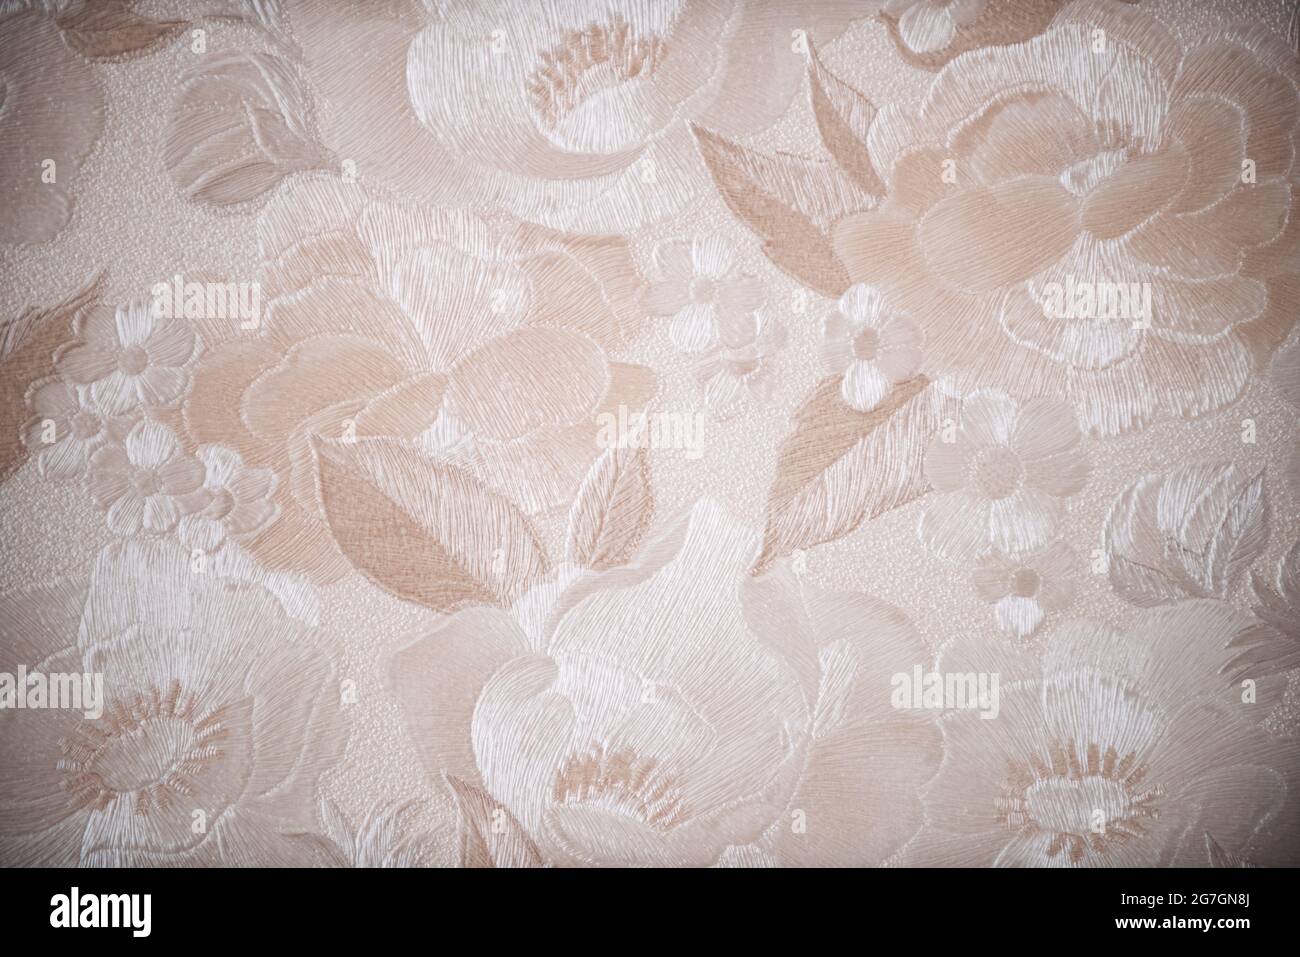 Floral graphic pattern, vintage flowers background Stock Photo